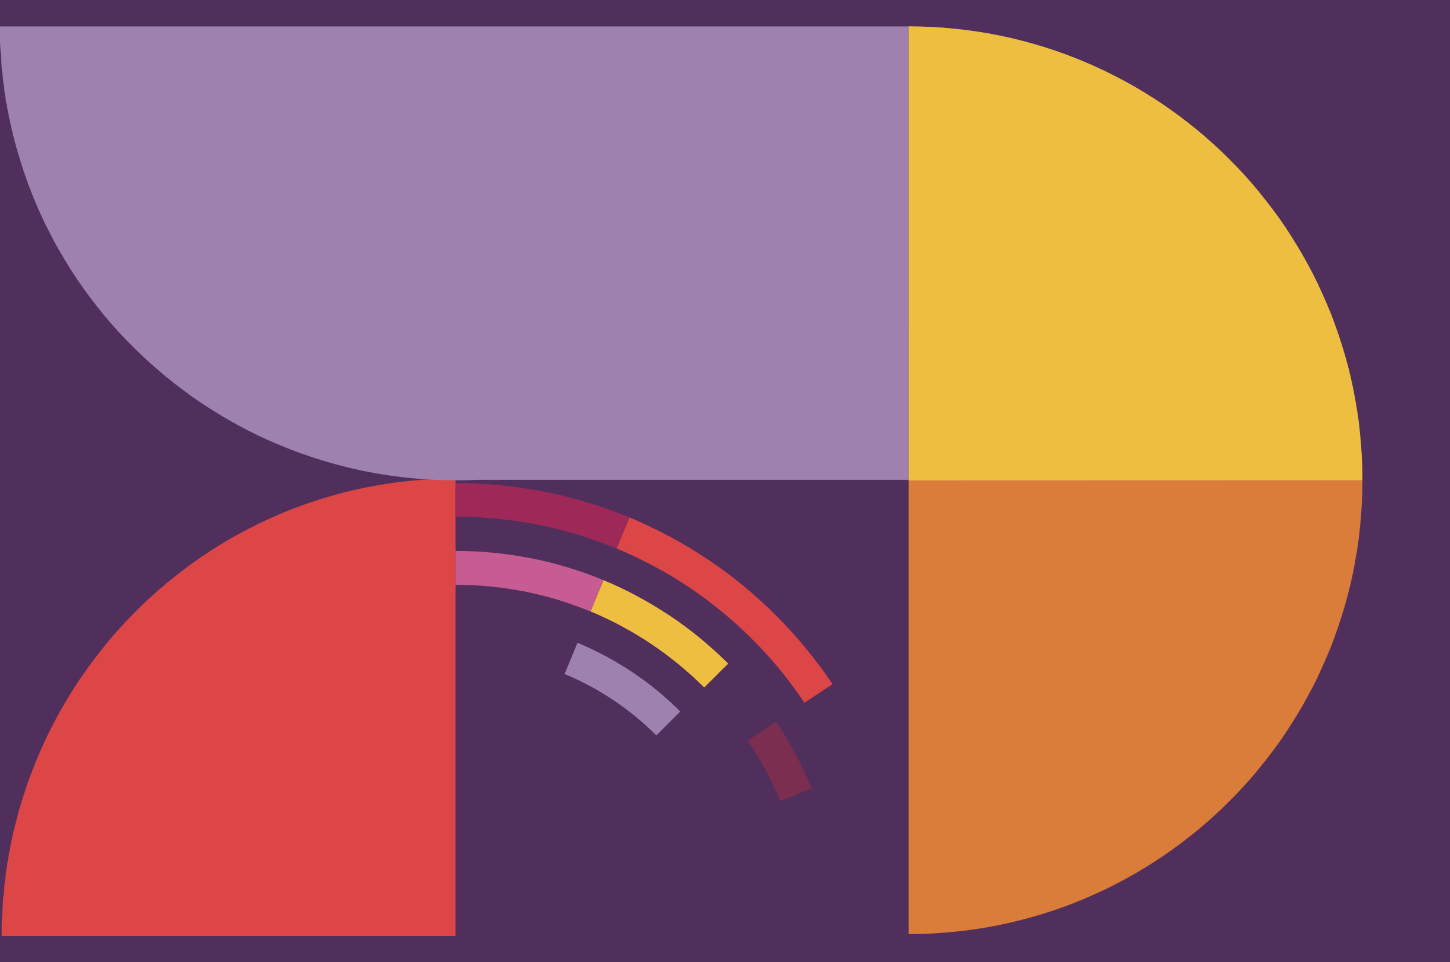 Half and quarter circles in yellow, orange, red and lilac.